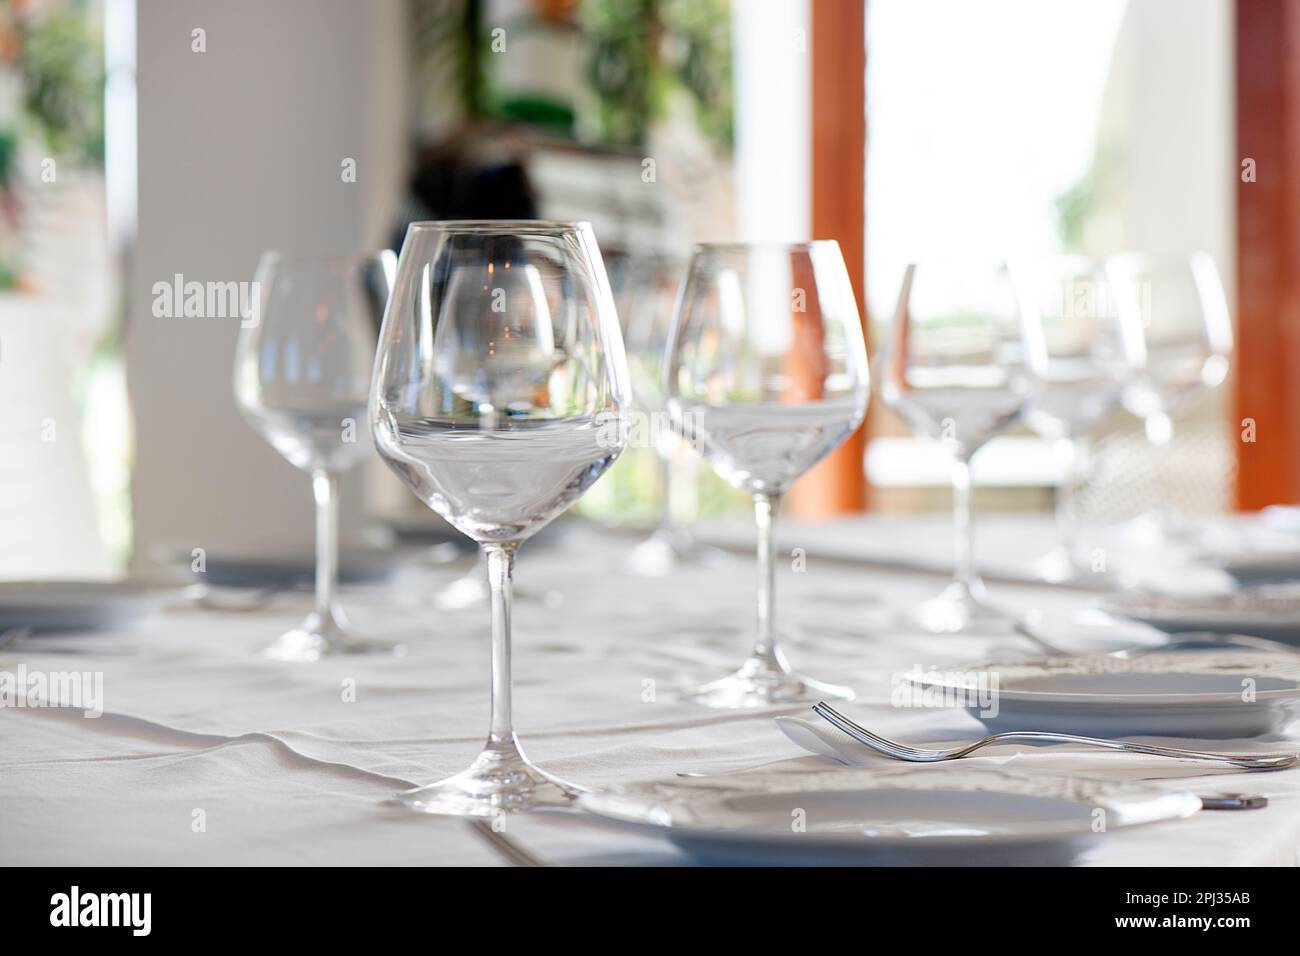 Table arrangement at a restaurant with sparkling crystal wine and water glasses, and starter plates, ready for a special event or a dining experience Stock Photo